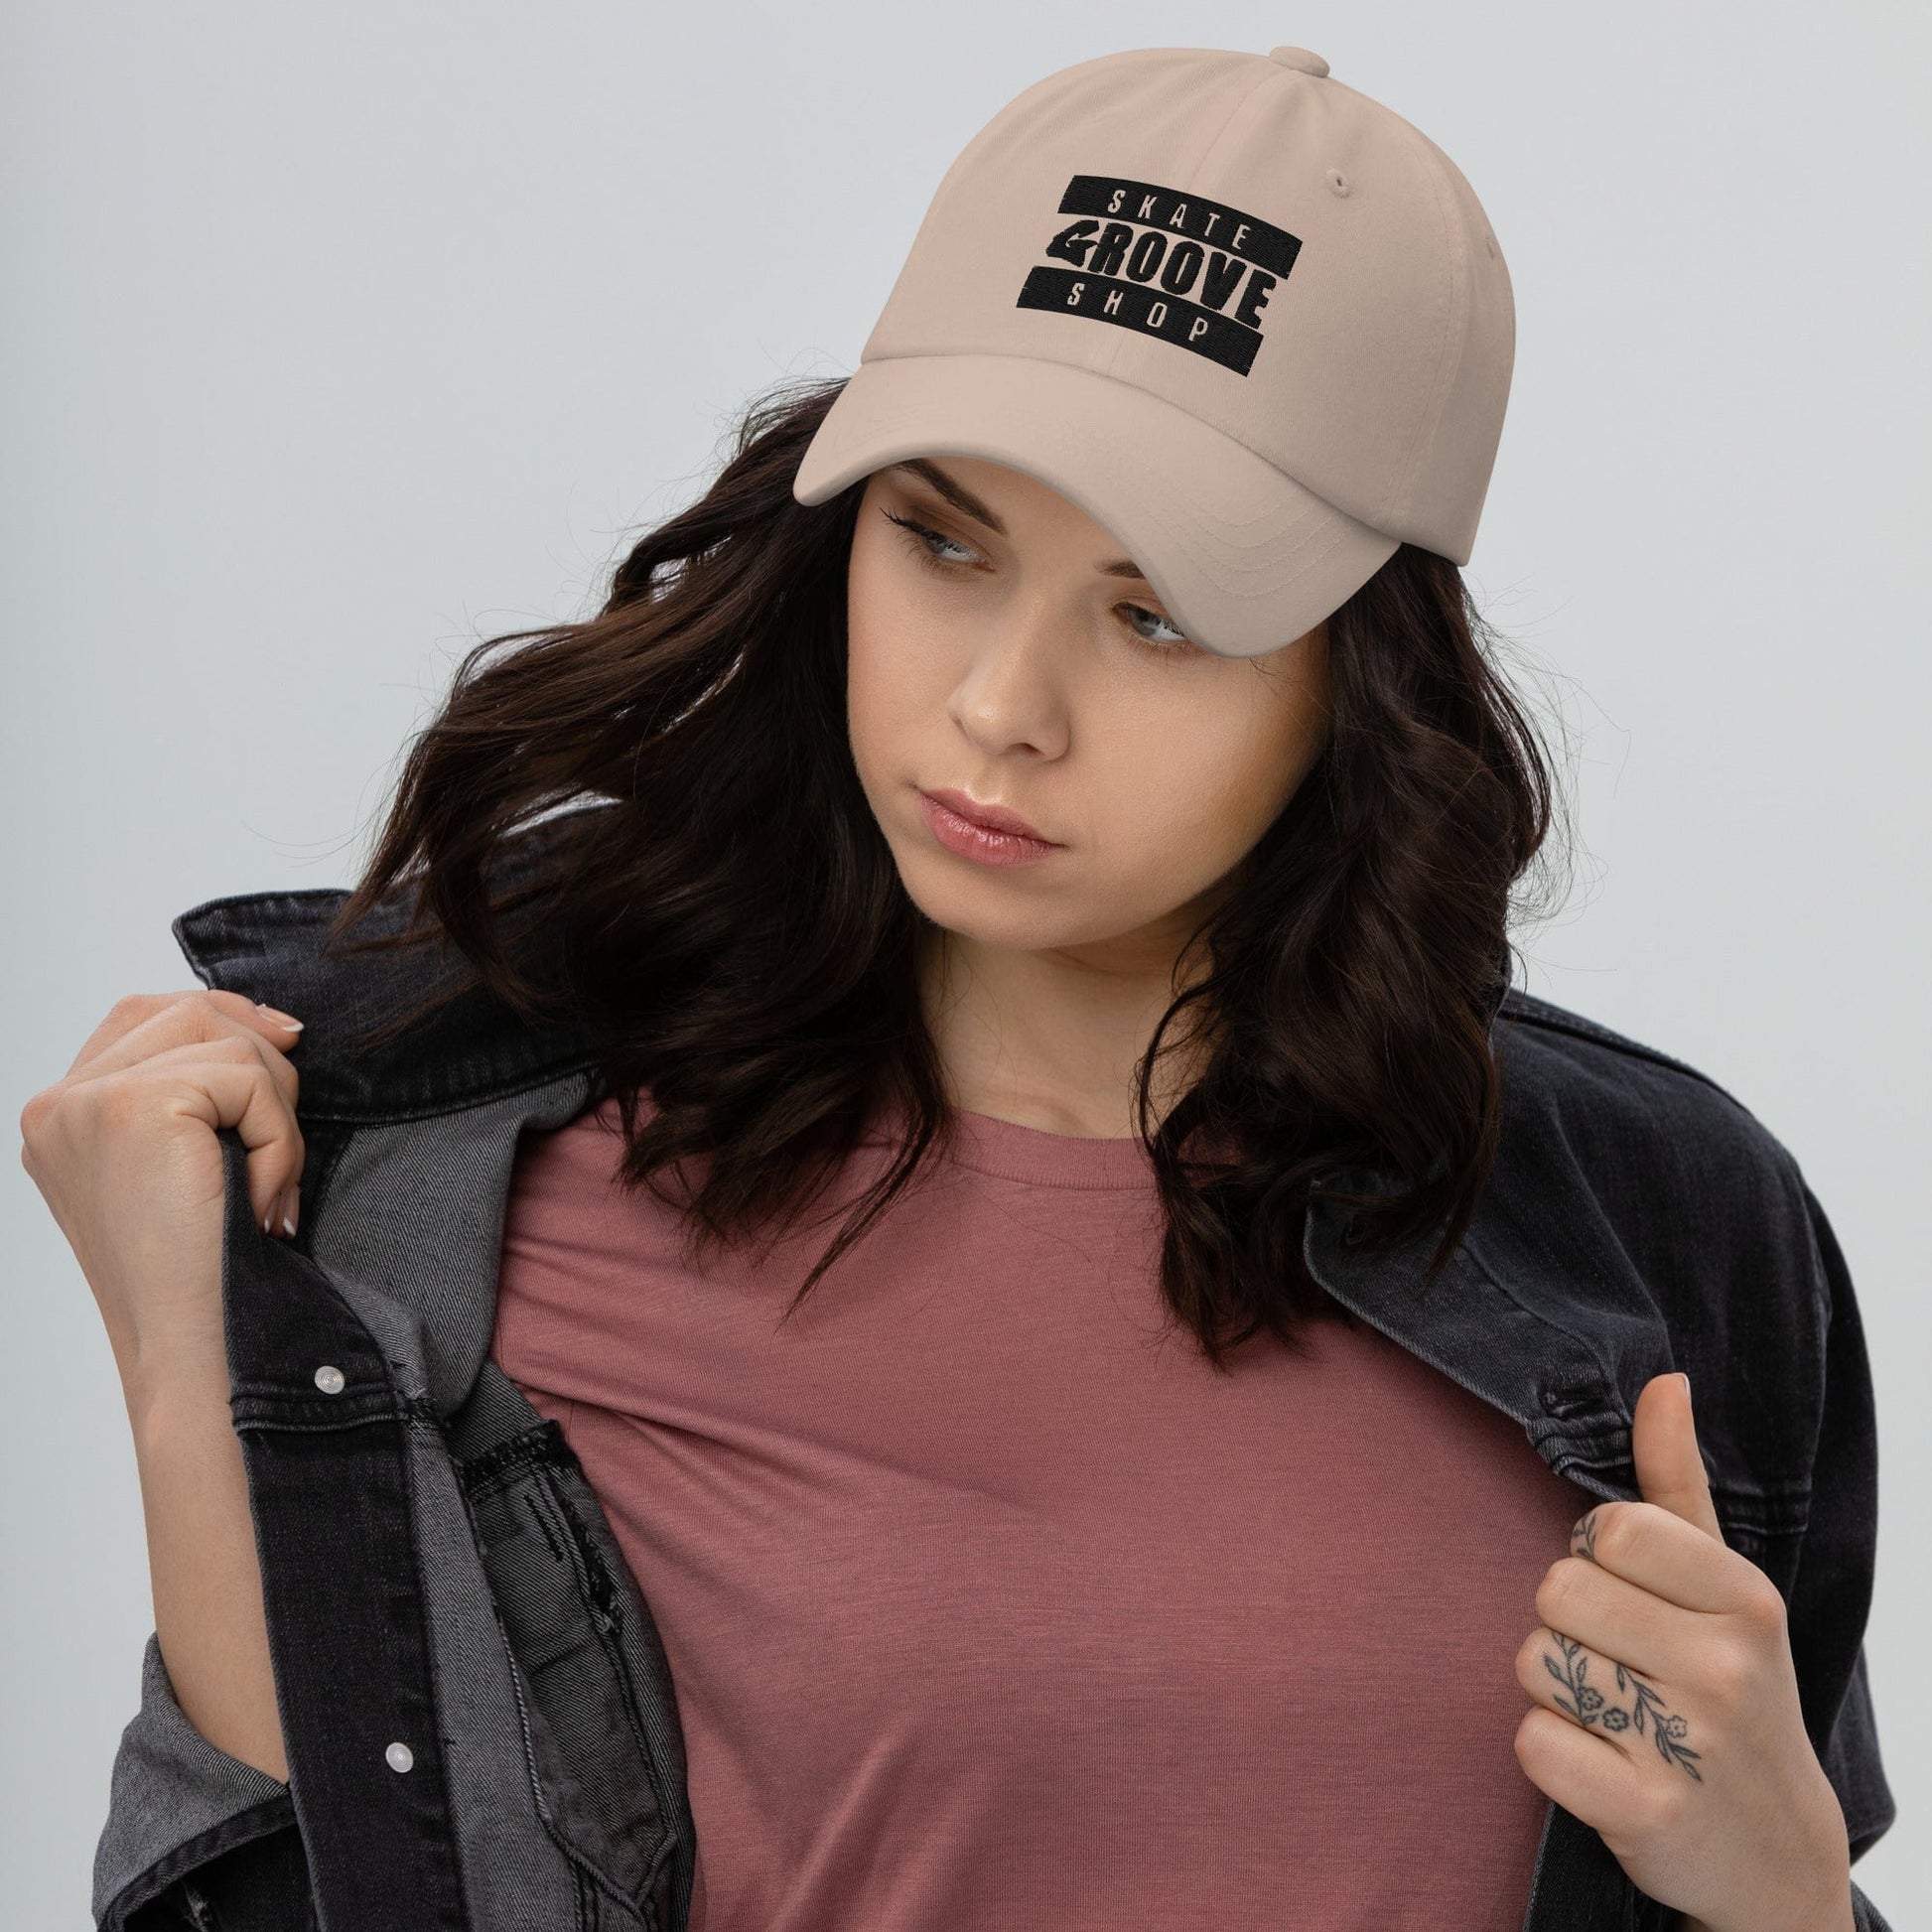  Groove Dad Hat The Groove Skate Shop The Groove Skate Shop